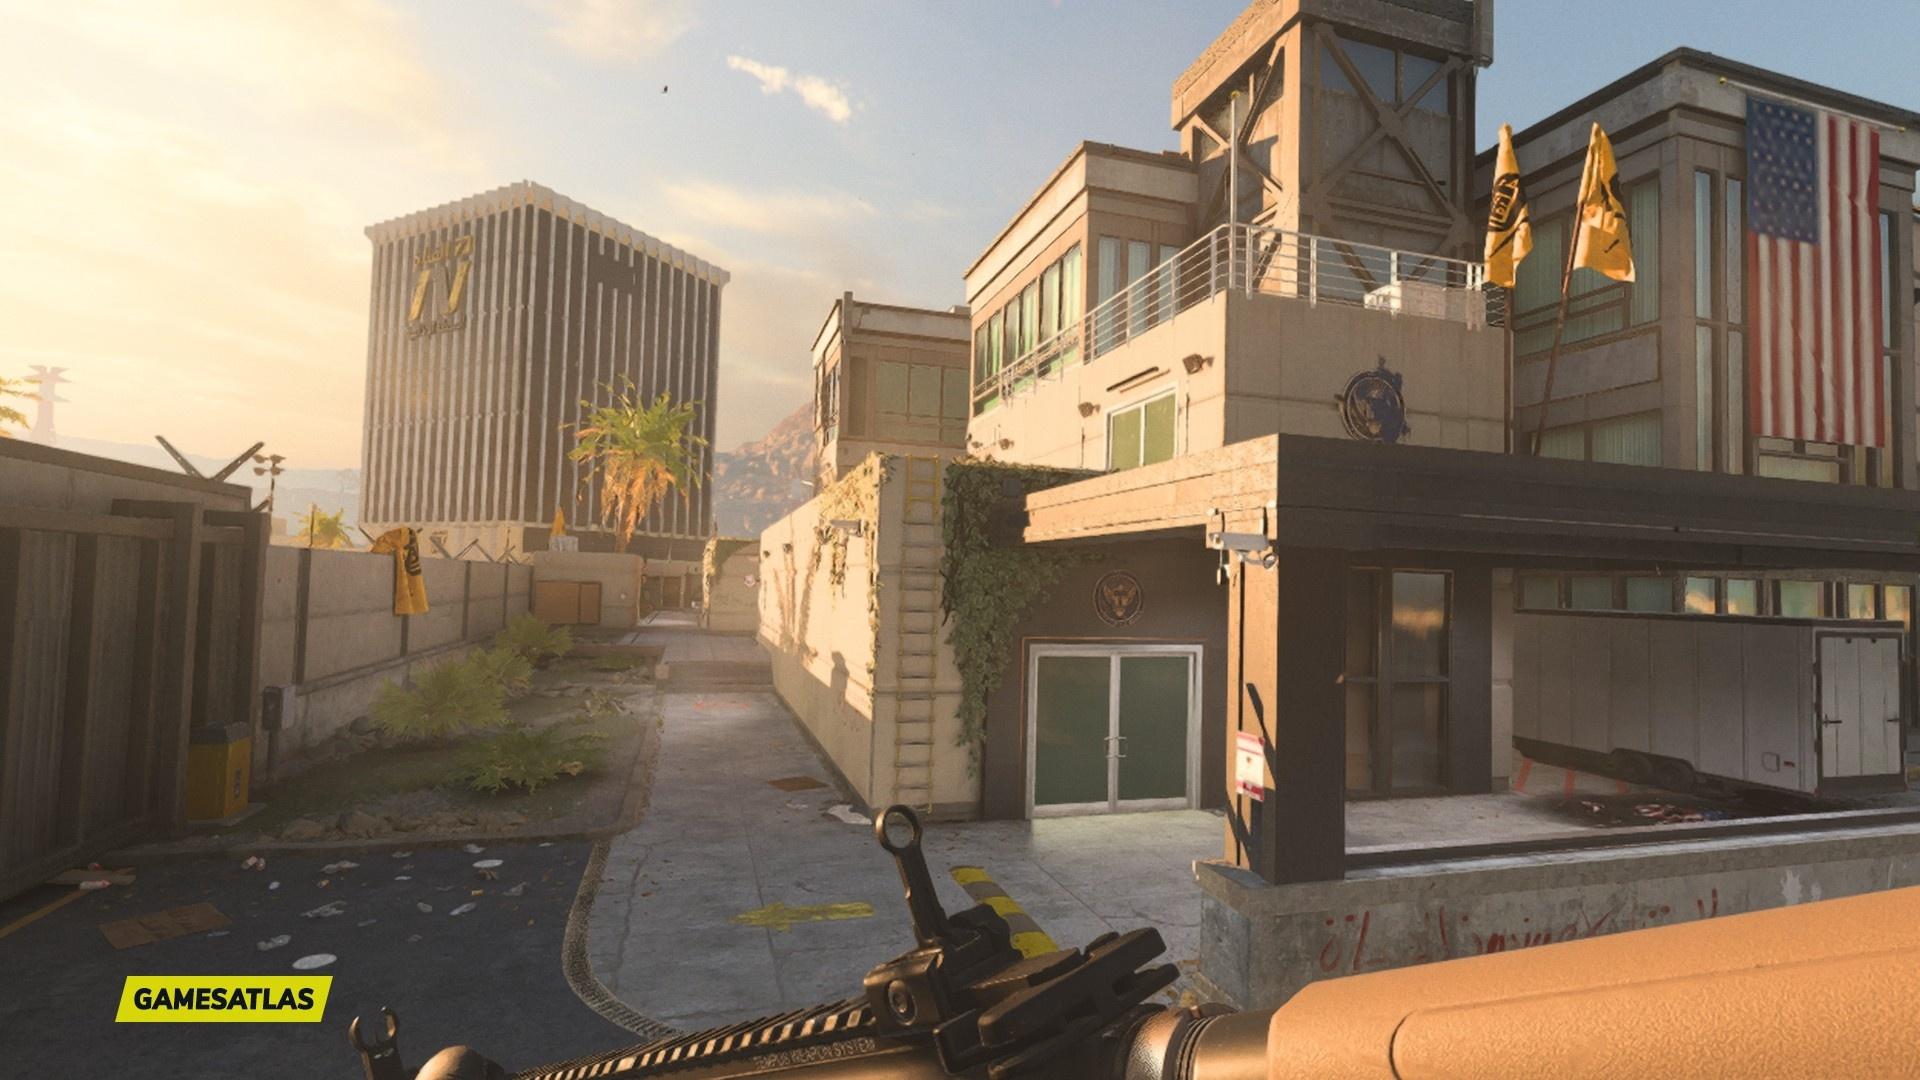 BEST JUMPSPOTS + LINES OF SIGHT ON EMBASSY (MW2 RANKED PLAY) : r